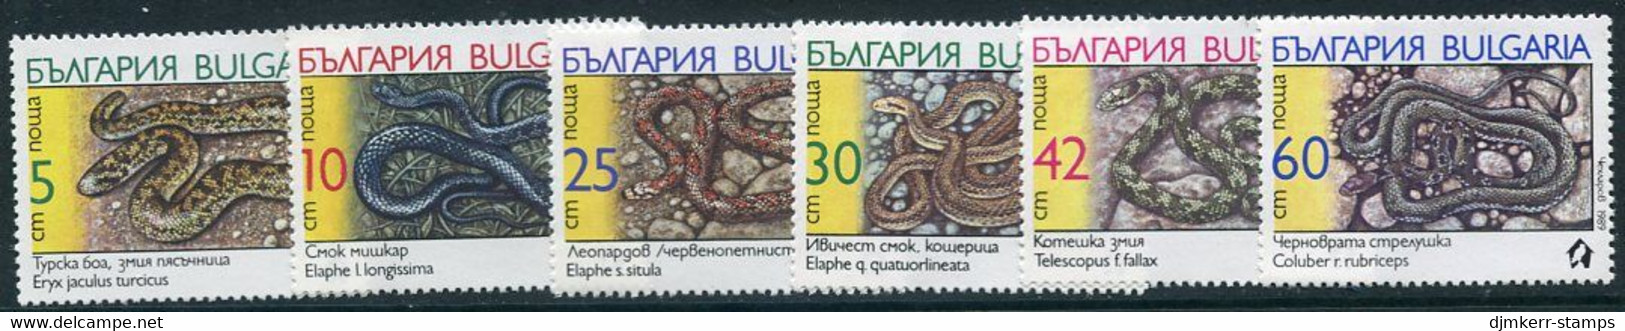 BULGARIA 1989 Snakes  MNH / **.  Michel 3784-89 - Unused Stamps